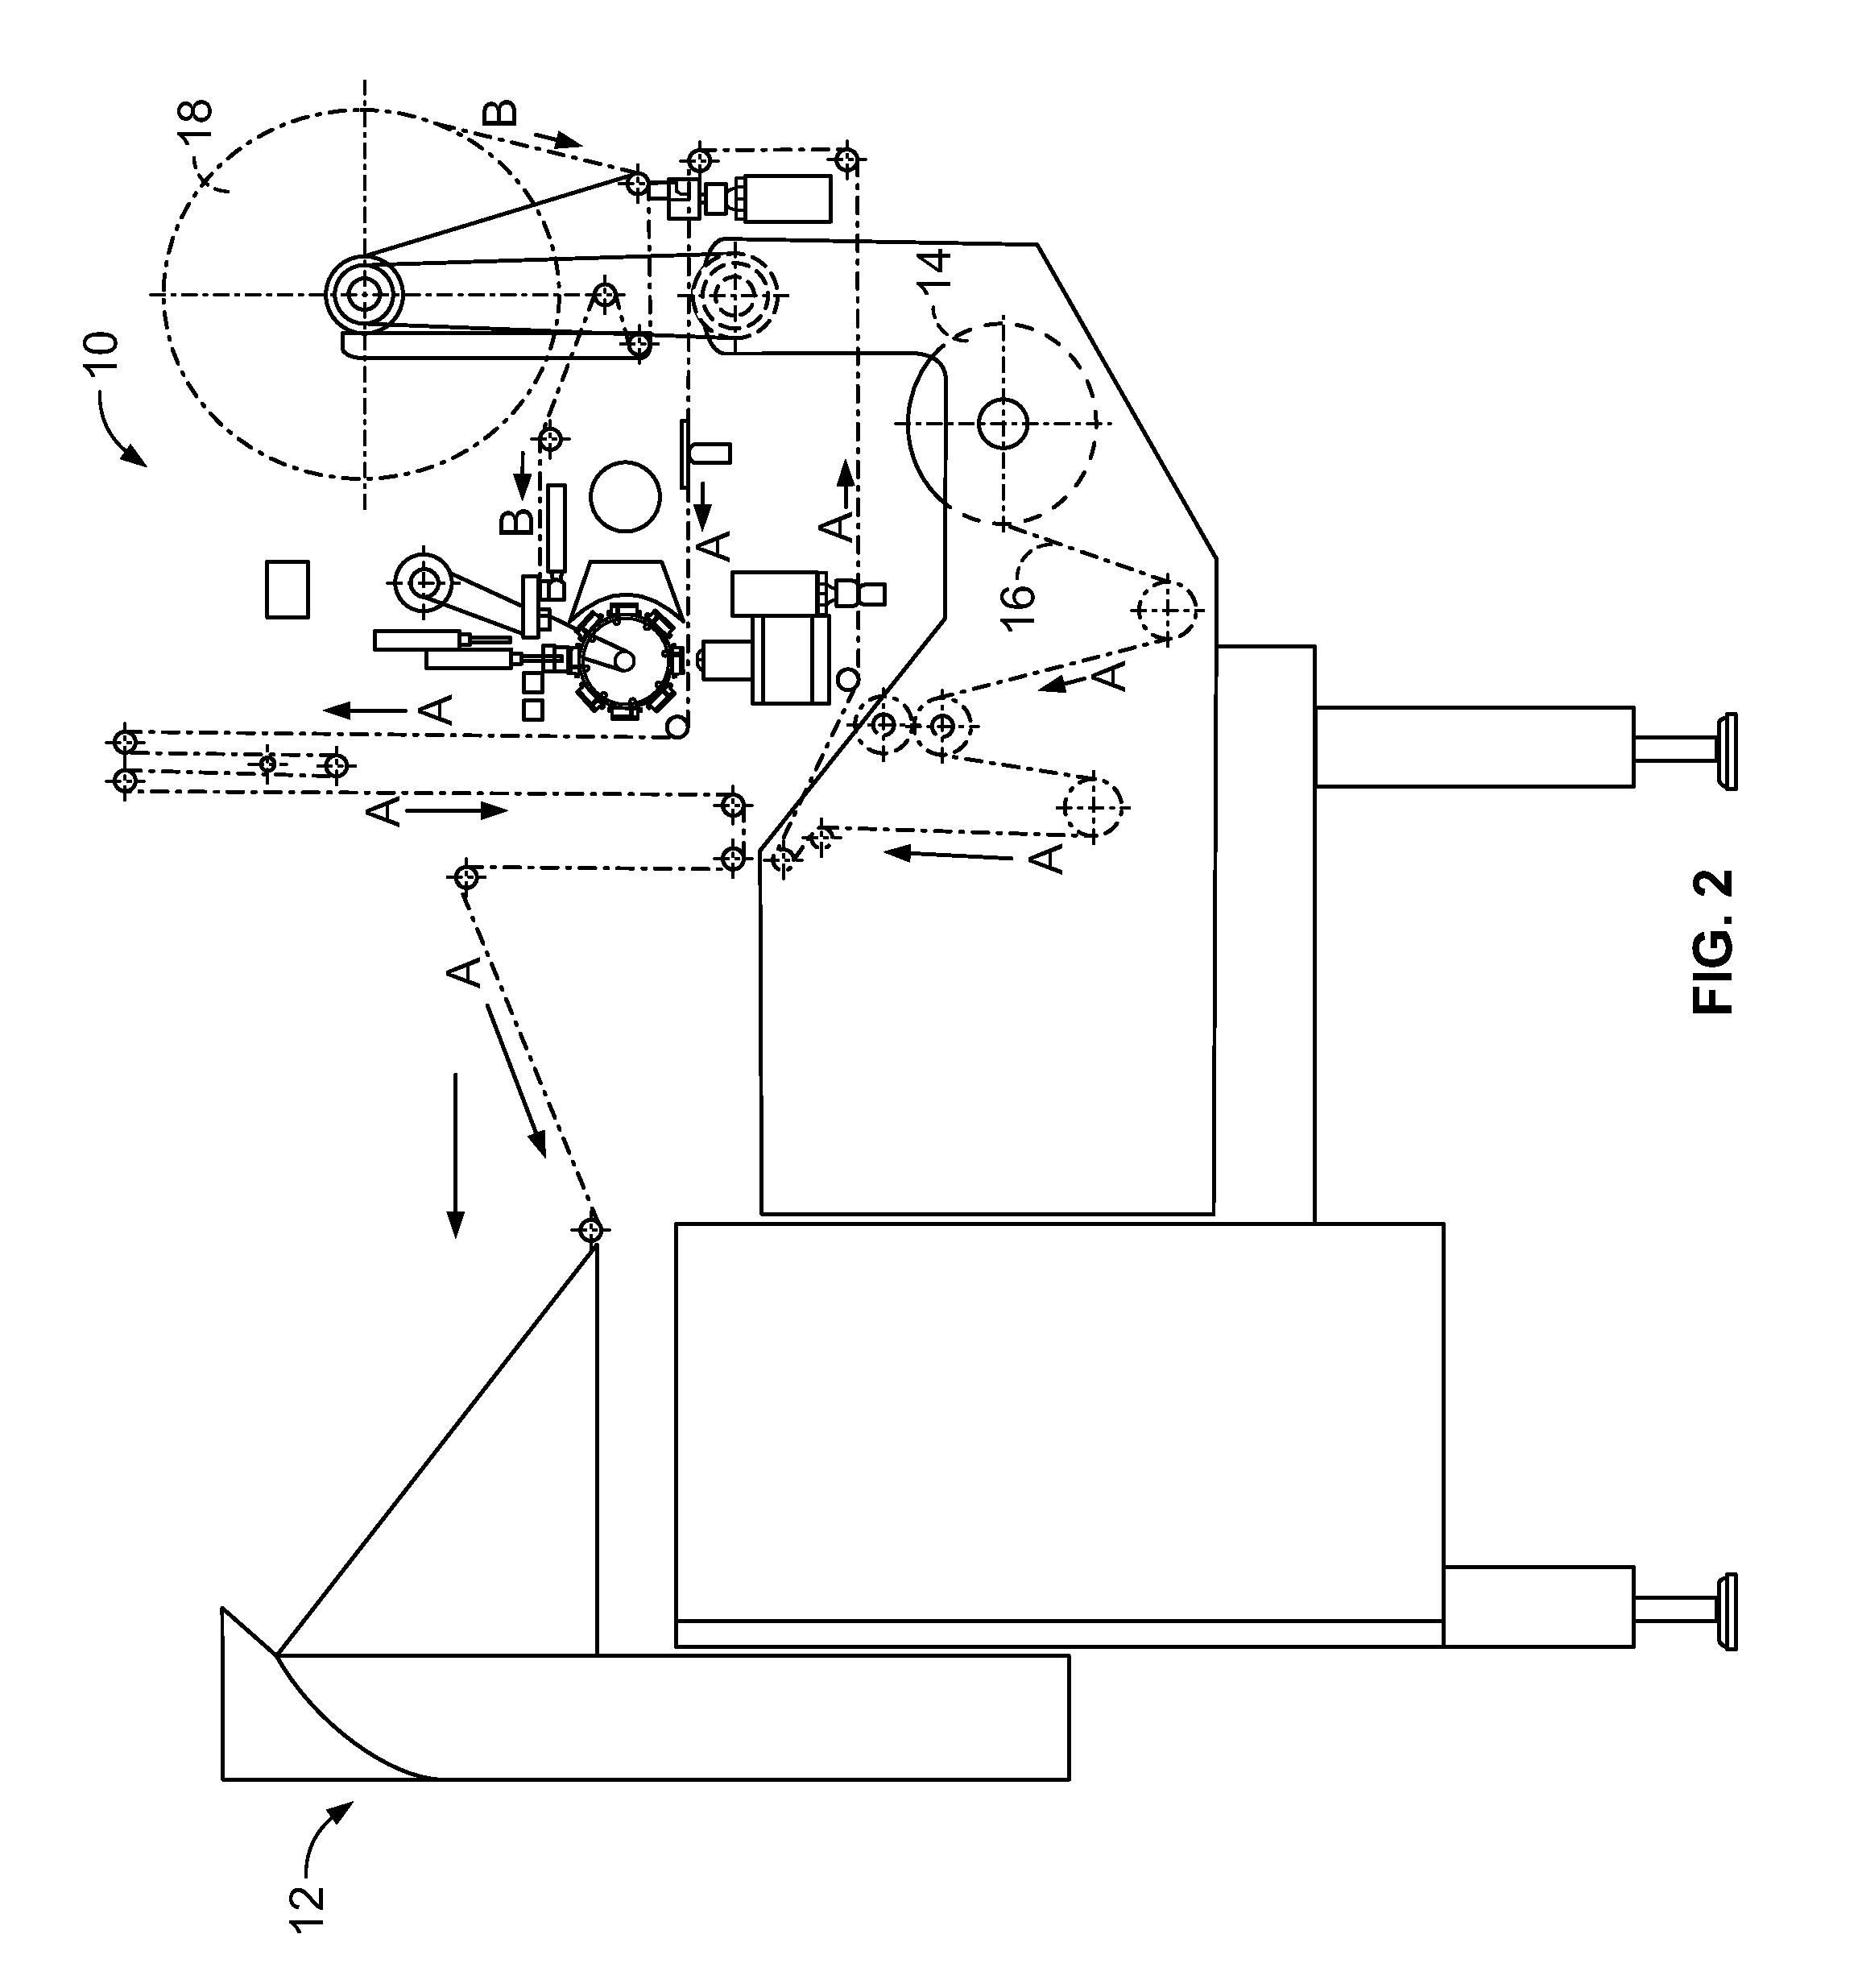 Apparatus and method for manufacture of a top opening reclosable bag having a tape formed reclosable seal